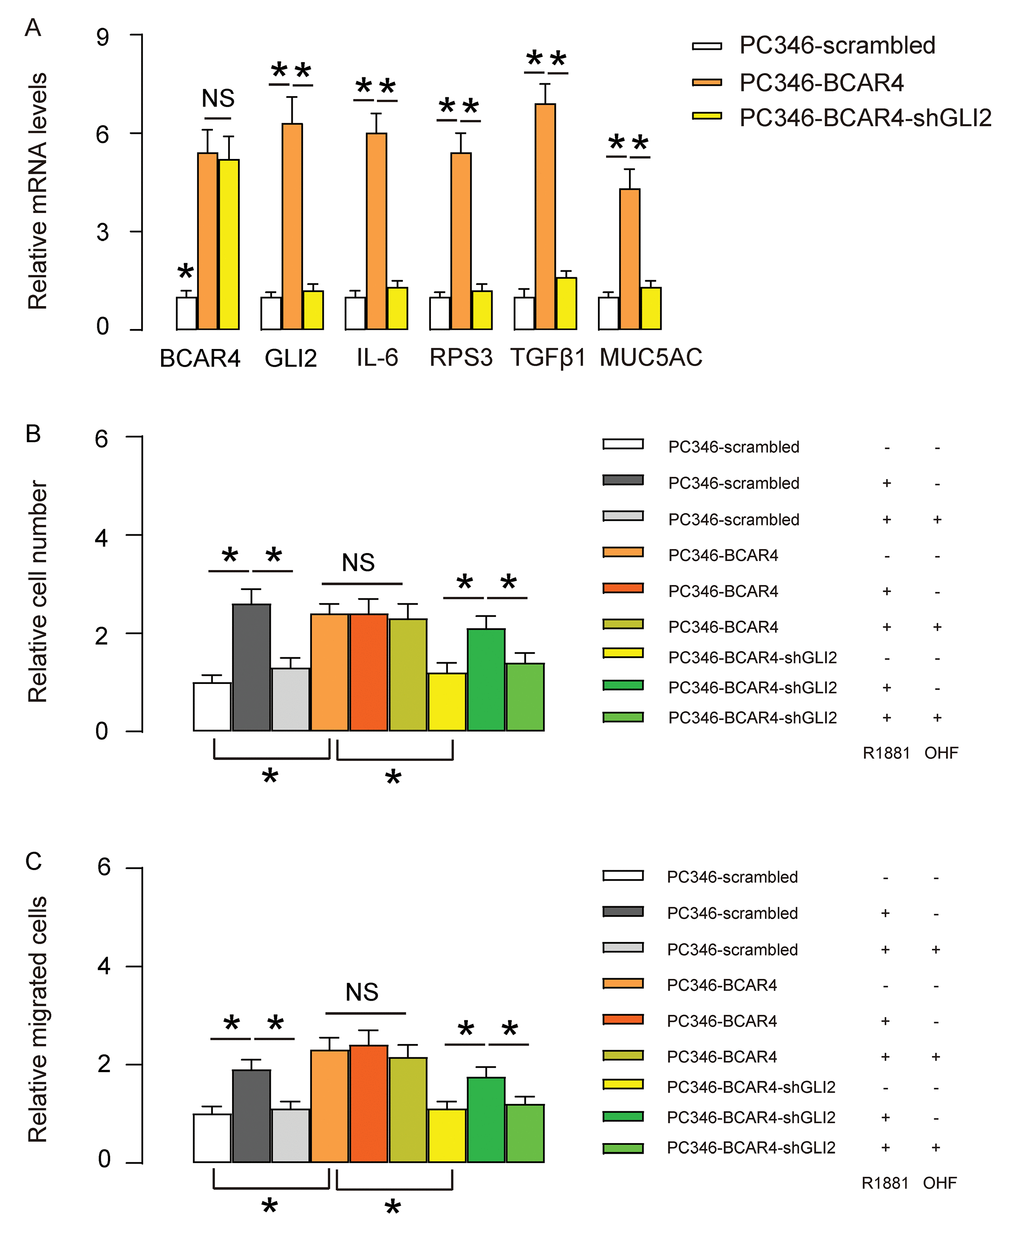 Depletion of GLI2 abolishes the effects of BCAR4 on growth and migration of PC346 cells. (A) We used shGLI2 to deplete GLI2 in BCAR4-transfected PC346 cells and did RT-qPCR for BCAR4 and GLI2. Transfection with shGLI2 significantly decreased GLI2 and GLI2 downstream genes IL-6, RPS3, TGFβ1 and MUC5AC, but did not alter BCAR4 levels. (B-C) These cells (shGLI2 and BCAR4-transfected cells, BCAR4-transfected cells and control scrambled-transfected cells) were treated with null, R1881, with/without OHF. (B) Cell growth was examined in an CCK-8 assay (C) Cell migration potential was assessed in a transwell assay. *p